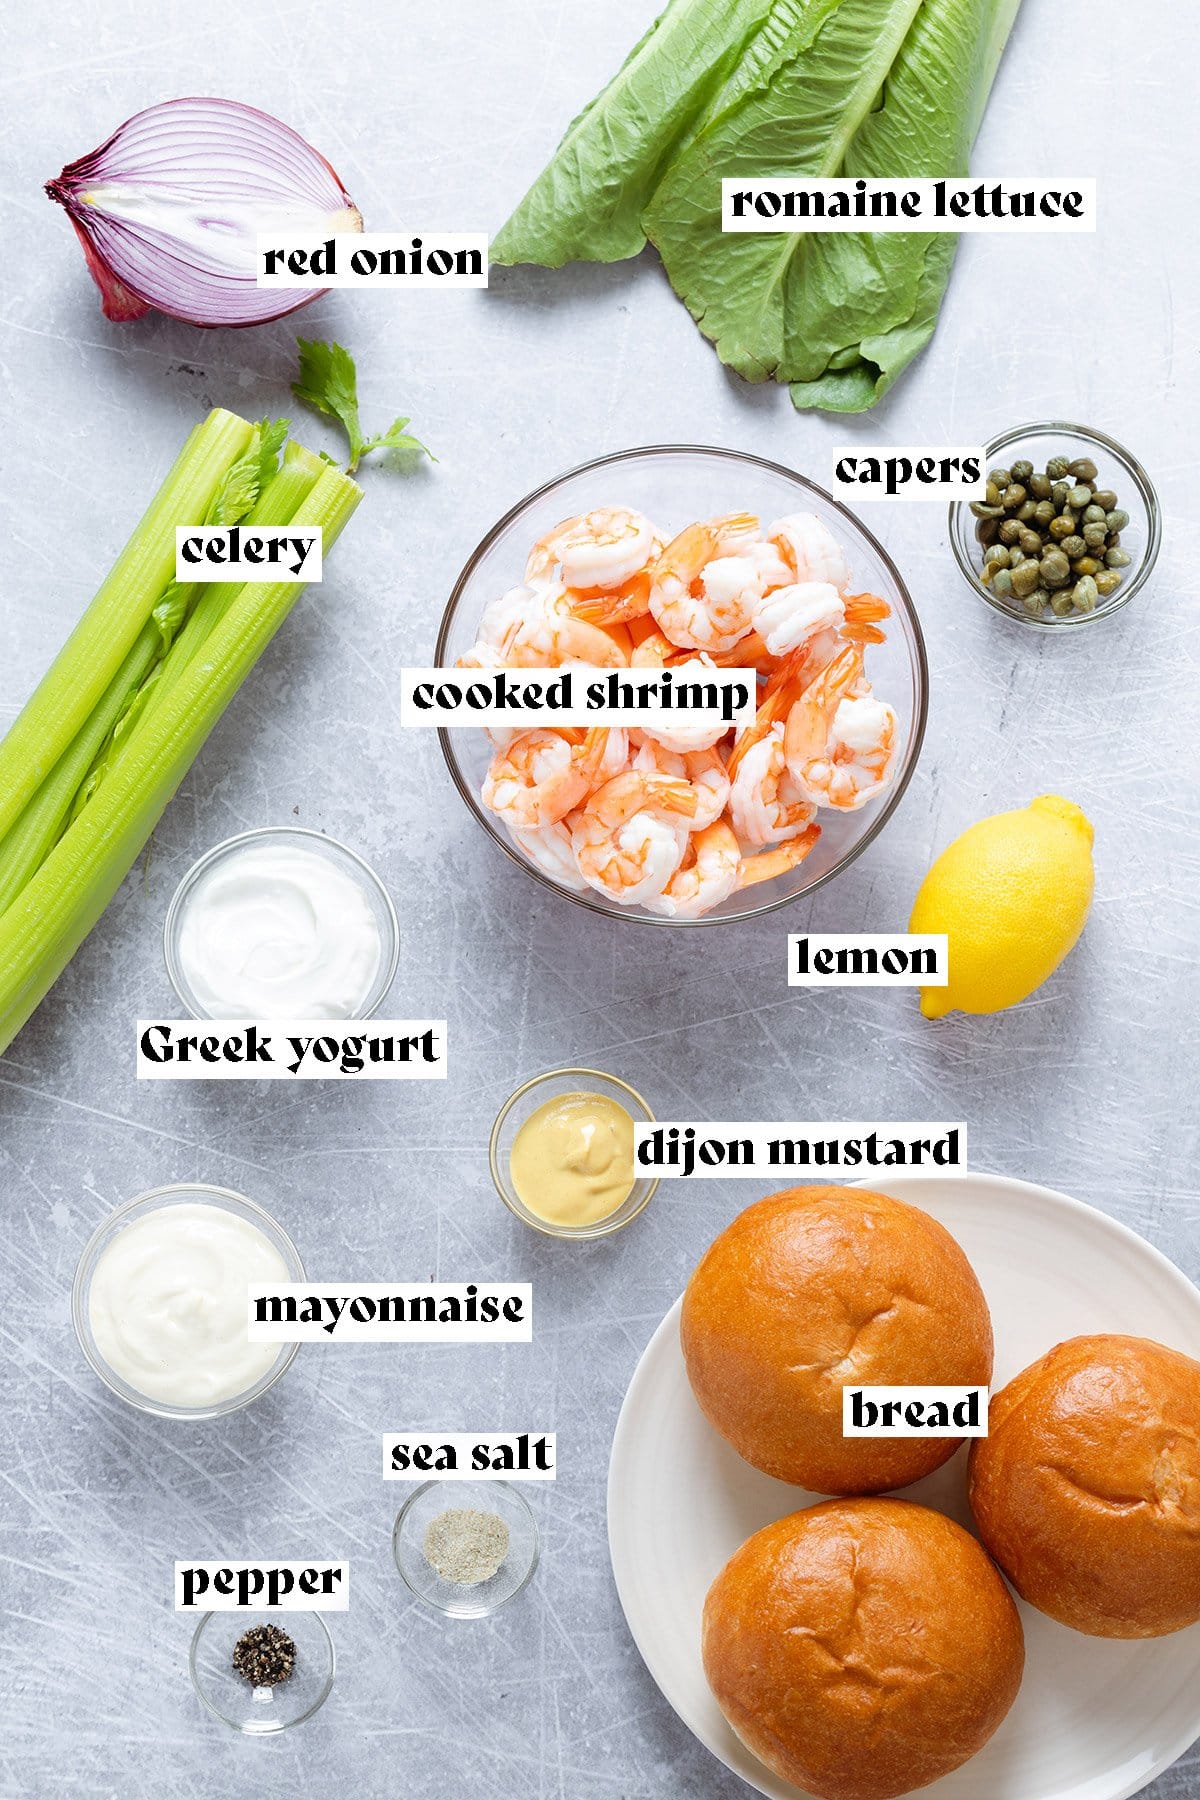 Ingredients for a shrimp salad like cooked shrimp, celery, greek yogurt, and red onion all laid out on a metal background.